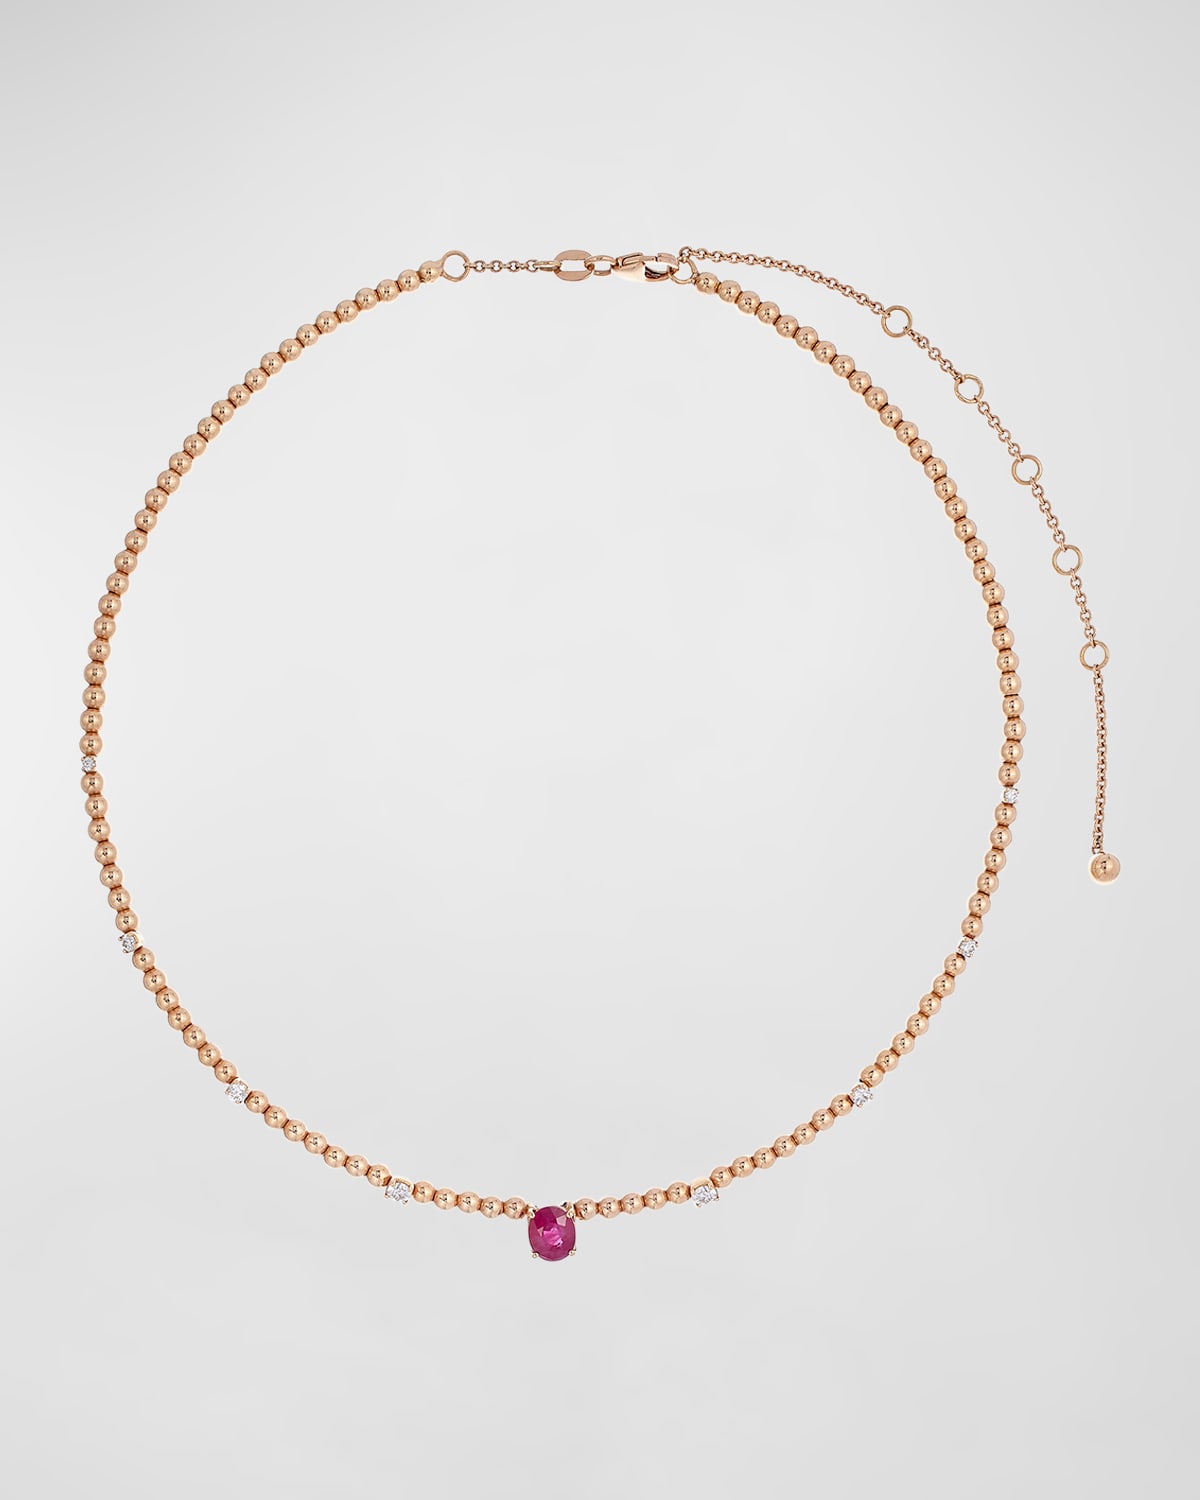 Krisonia 18k Rose Gold Diamond And Ruby Necklace